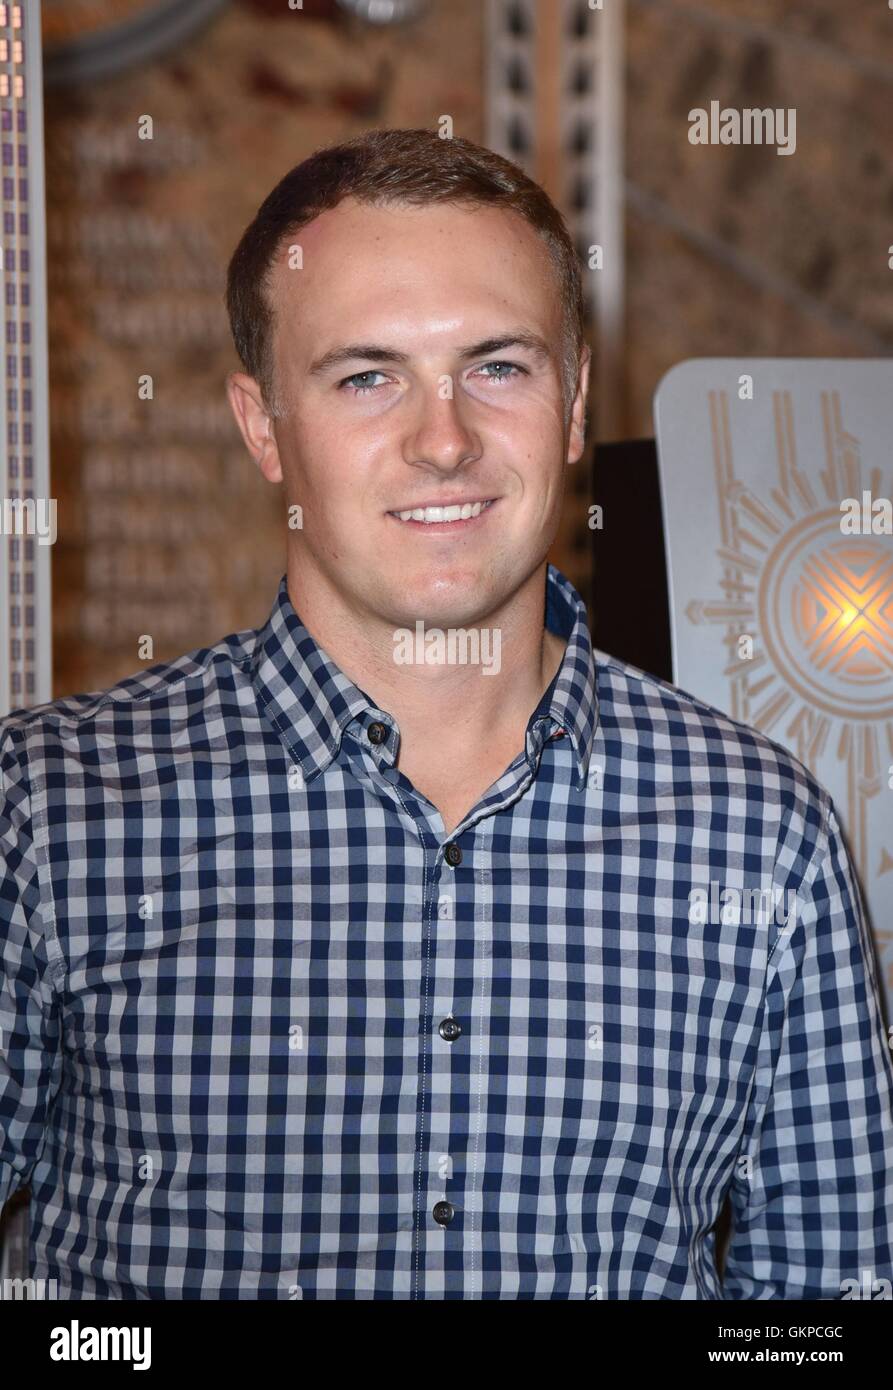 New York, NY, USA. 22nd Aug, 2016. Jordan Spieth at arrivals for Jordan Spieth Visits Empire State Building To Celebrate FedExCup Playoffs, Empire State Building, New York, NY August 22, 2016. Credit:  Derek Storm/Everett Collection/Alamy Live News Stock Photo